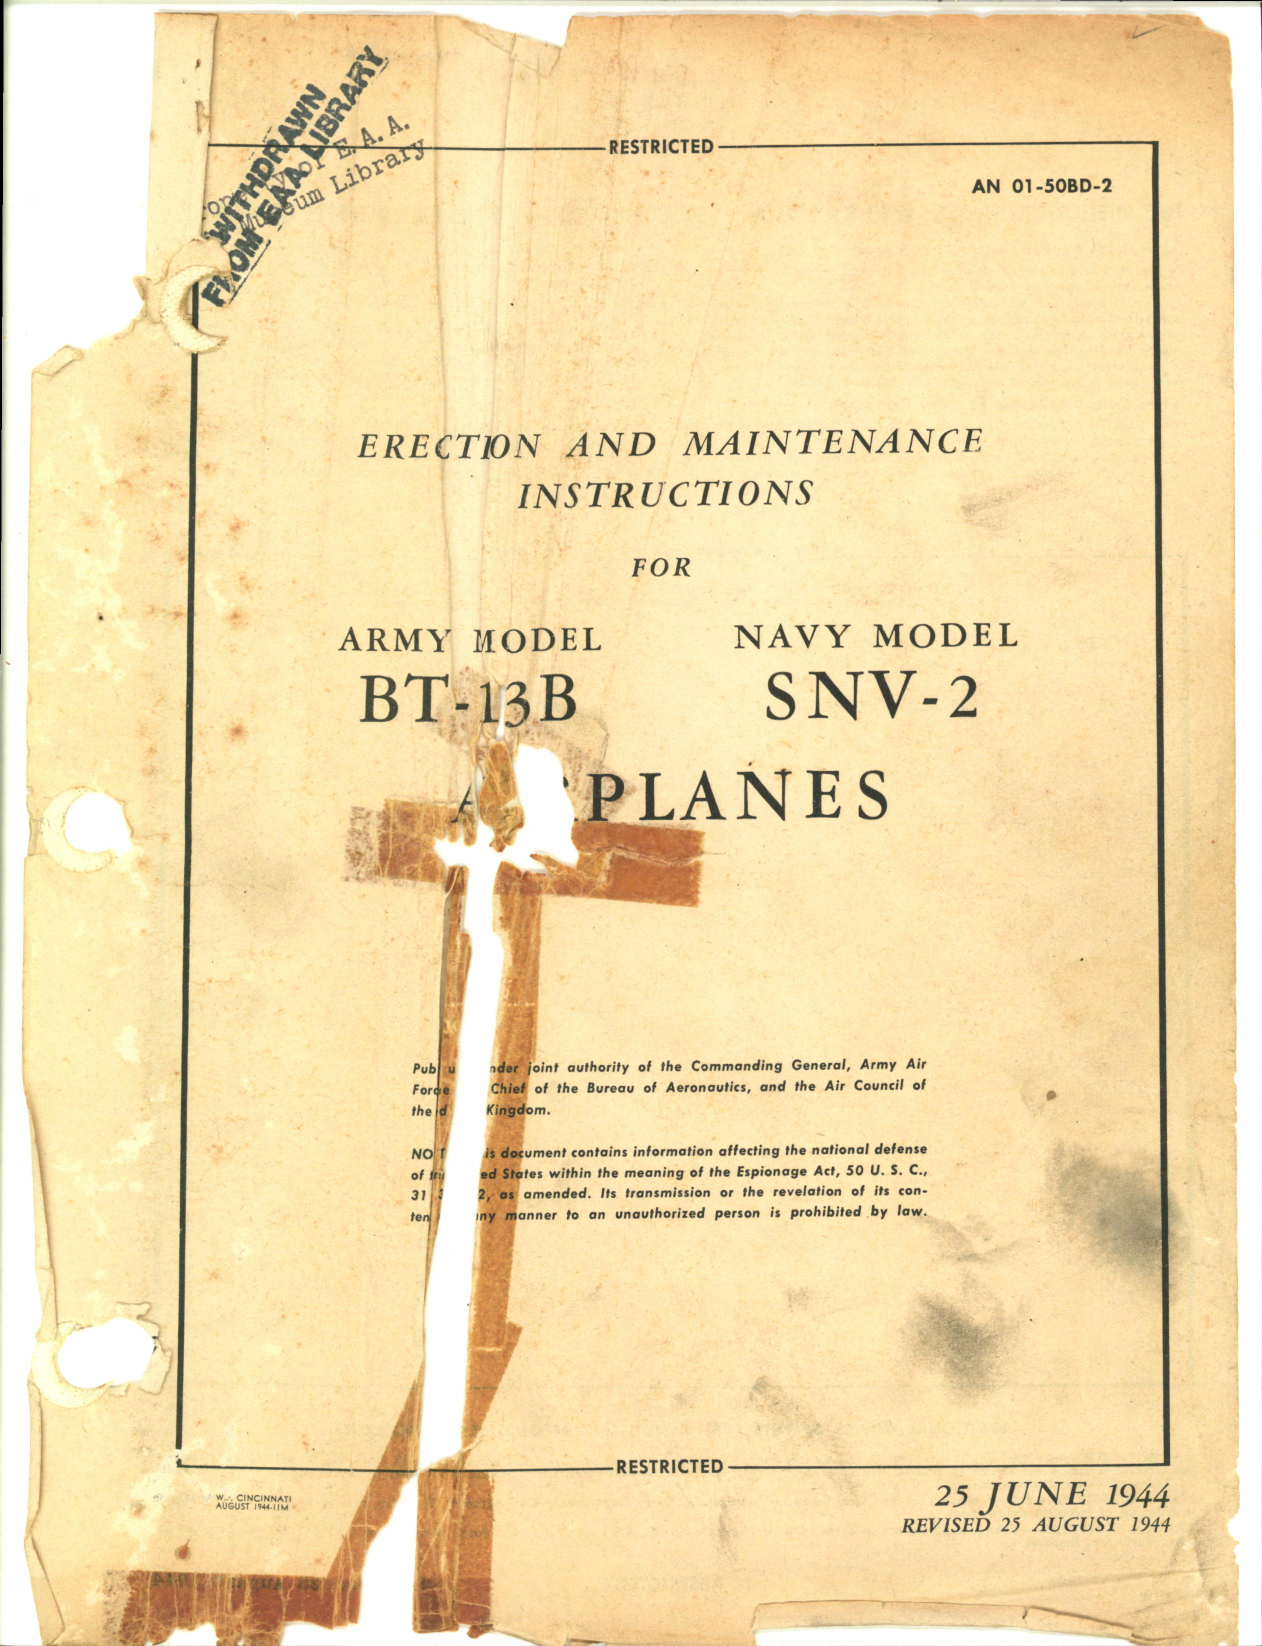 Sample page 1 from AirCorps Library document: Erection and Maintenance Instructions for BT-13B and SNV-2 Airplanes